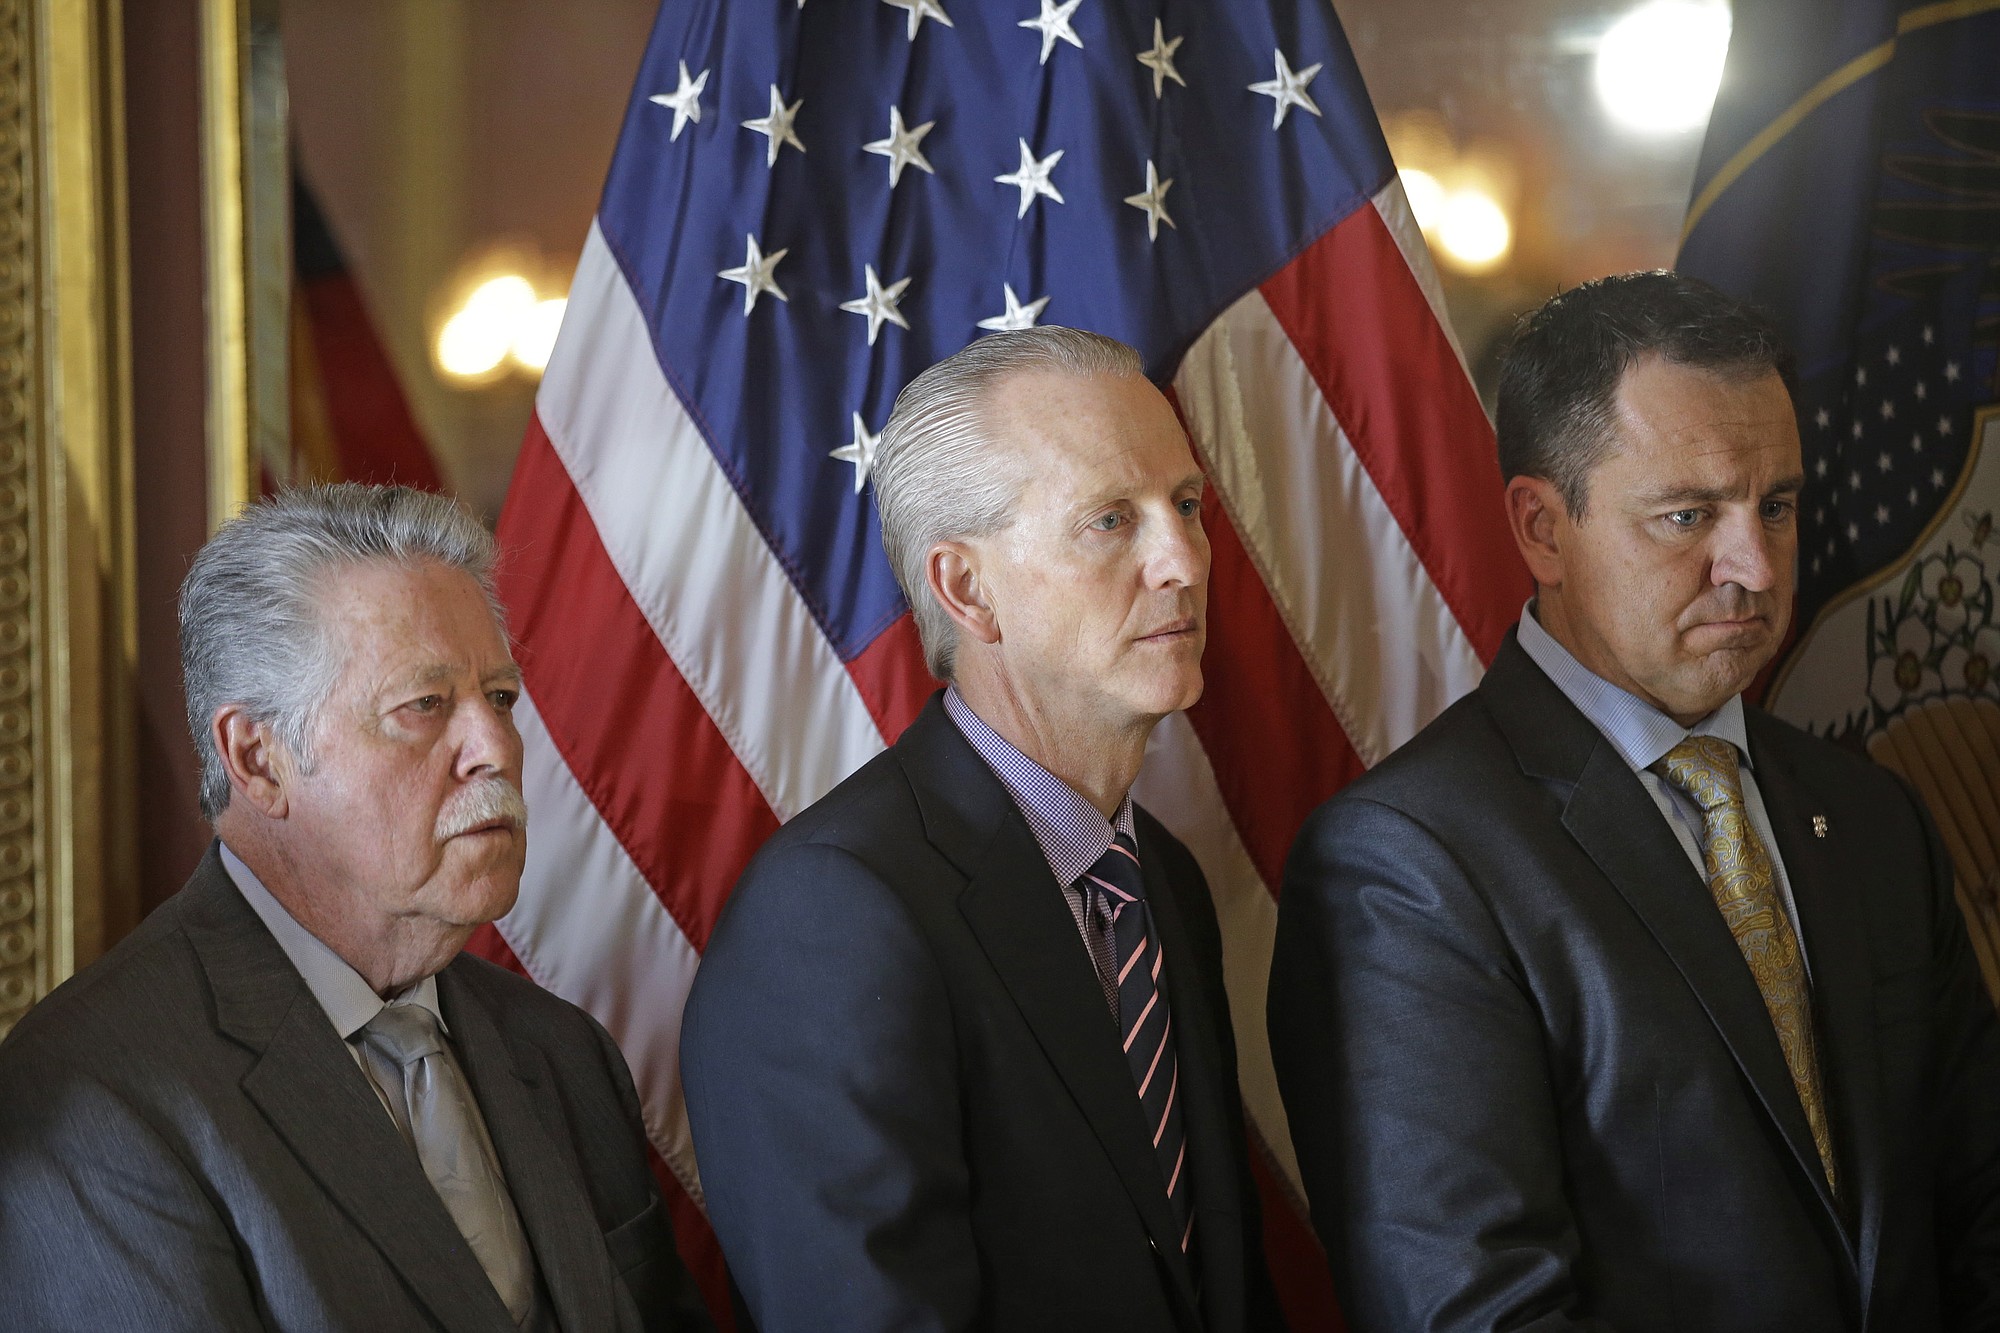 Minority leader Sen. Gene Davis, D- Salt Lake, left, Senate President Wayne Niederhauser, R-Sandy, center, and House Speaker Greg Hughes, R-Draper, listen during a news conference at the Utah State Capitol  Wednesday, March 4, 2015, in Salt Lake City. Utah lawmakers introduced a landmark anti-discrimination bill Wednesday that protects LGBT individuals while also carving out protections for the Boy Scouts of America and religious groups.